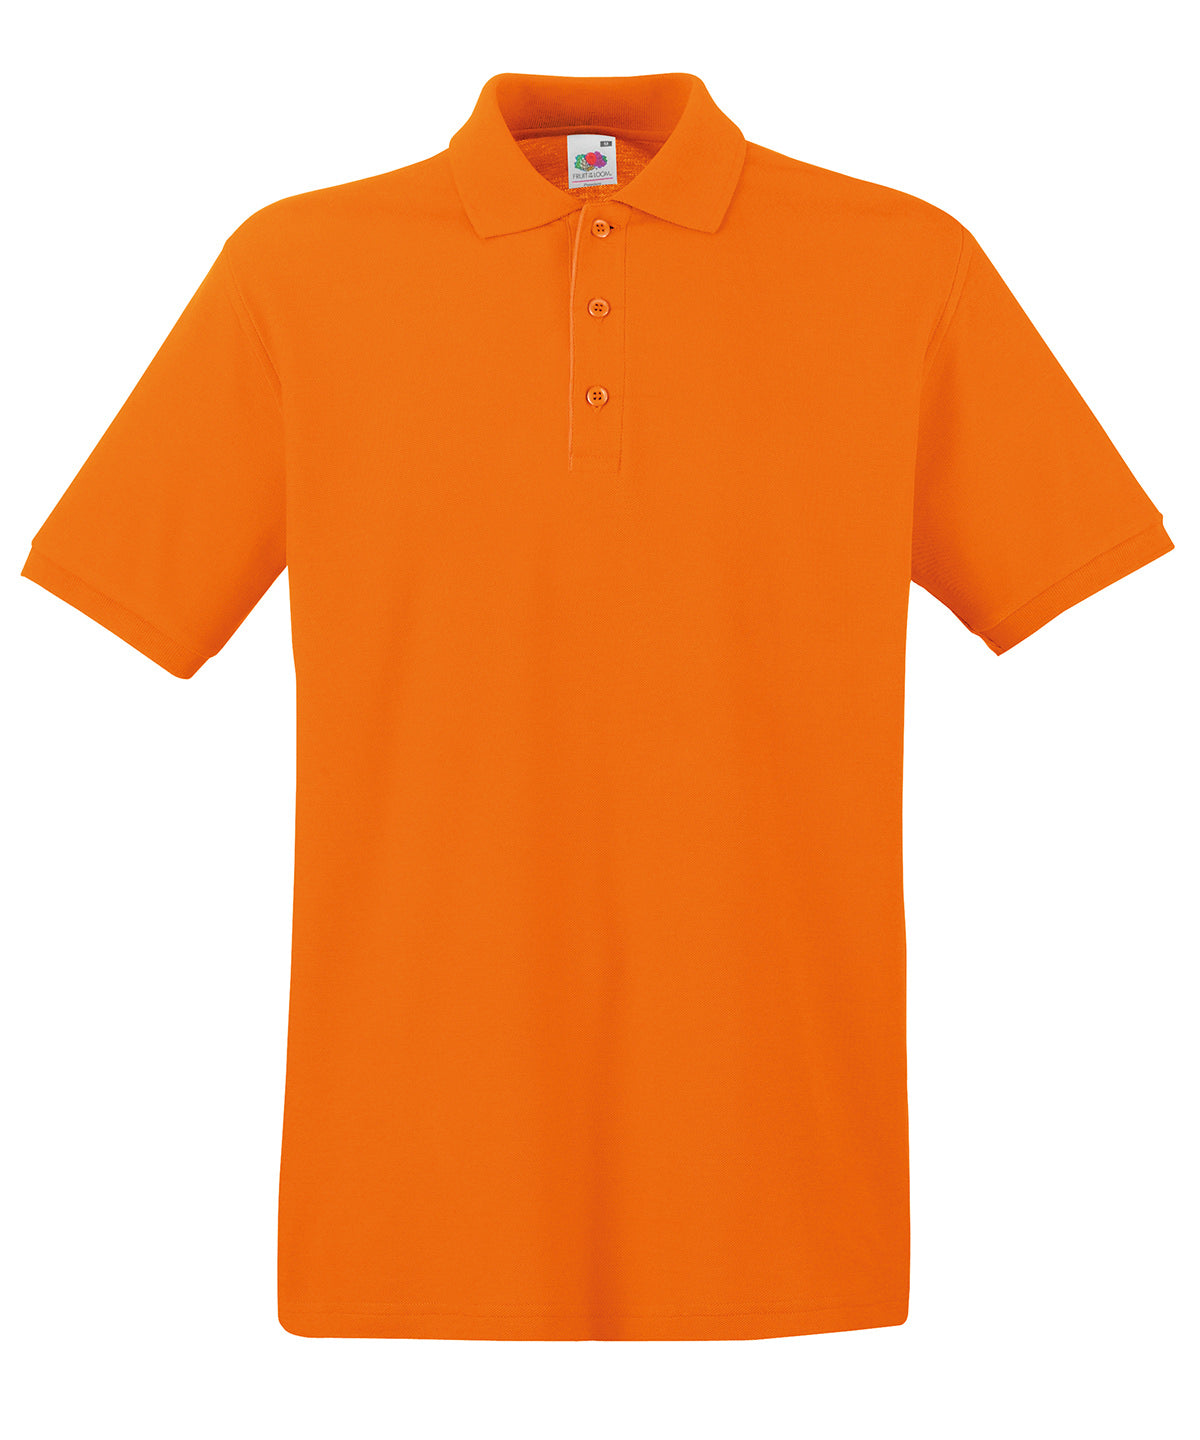 Orange - Premium polo Polos Fruit of the Loom 2022 Spring Edit, Fruit of the Loom Polos, Must Haves, New Colours For 2022, Plus Sizes, Polos & Casual, Raladeal - Recently Added Schoolwear Centres